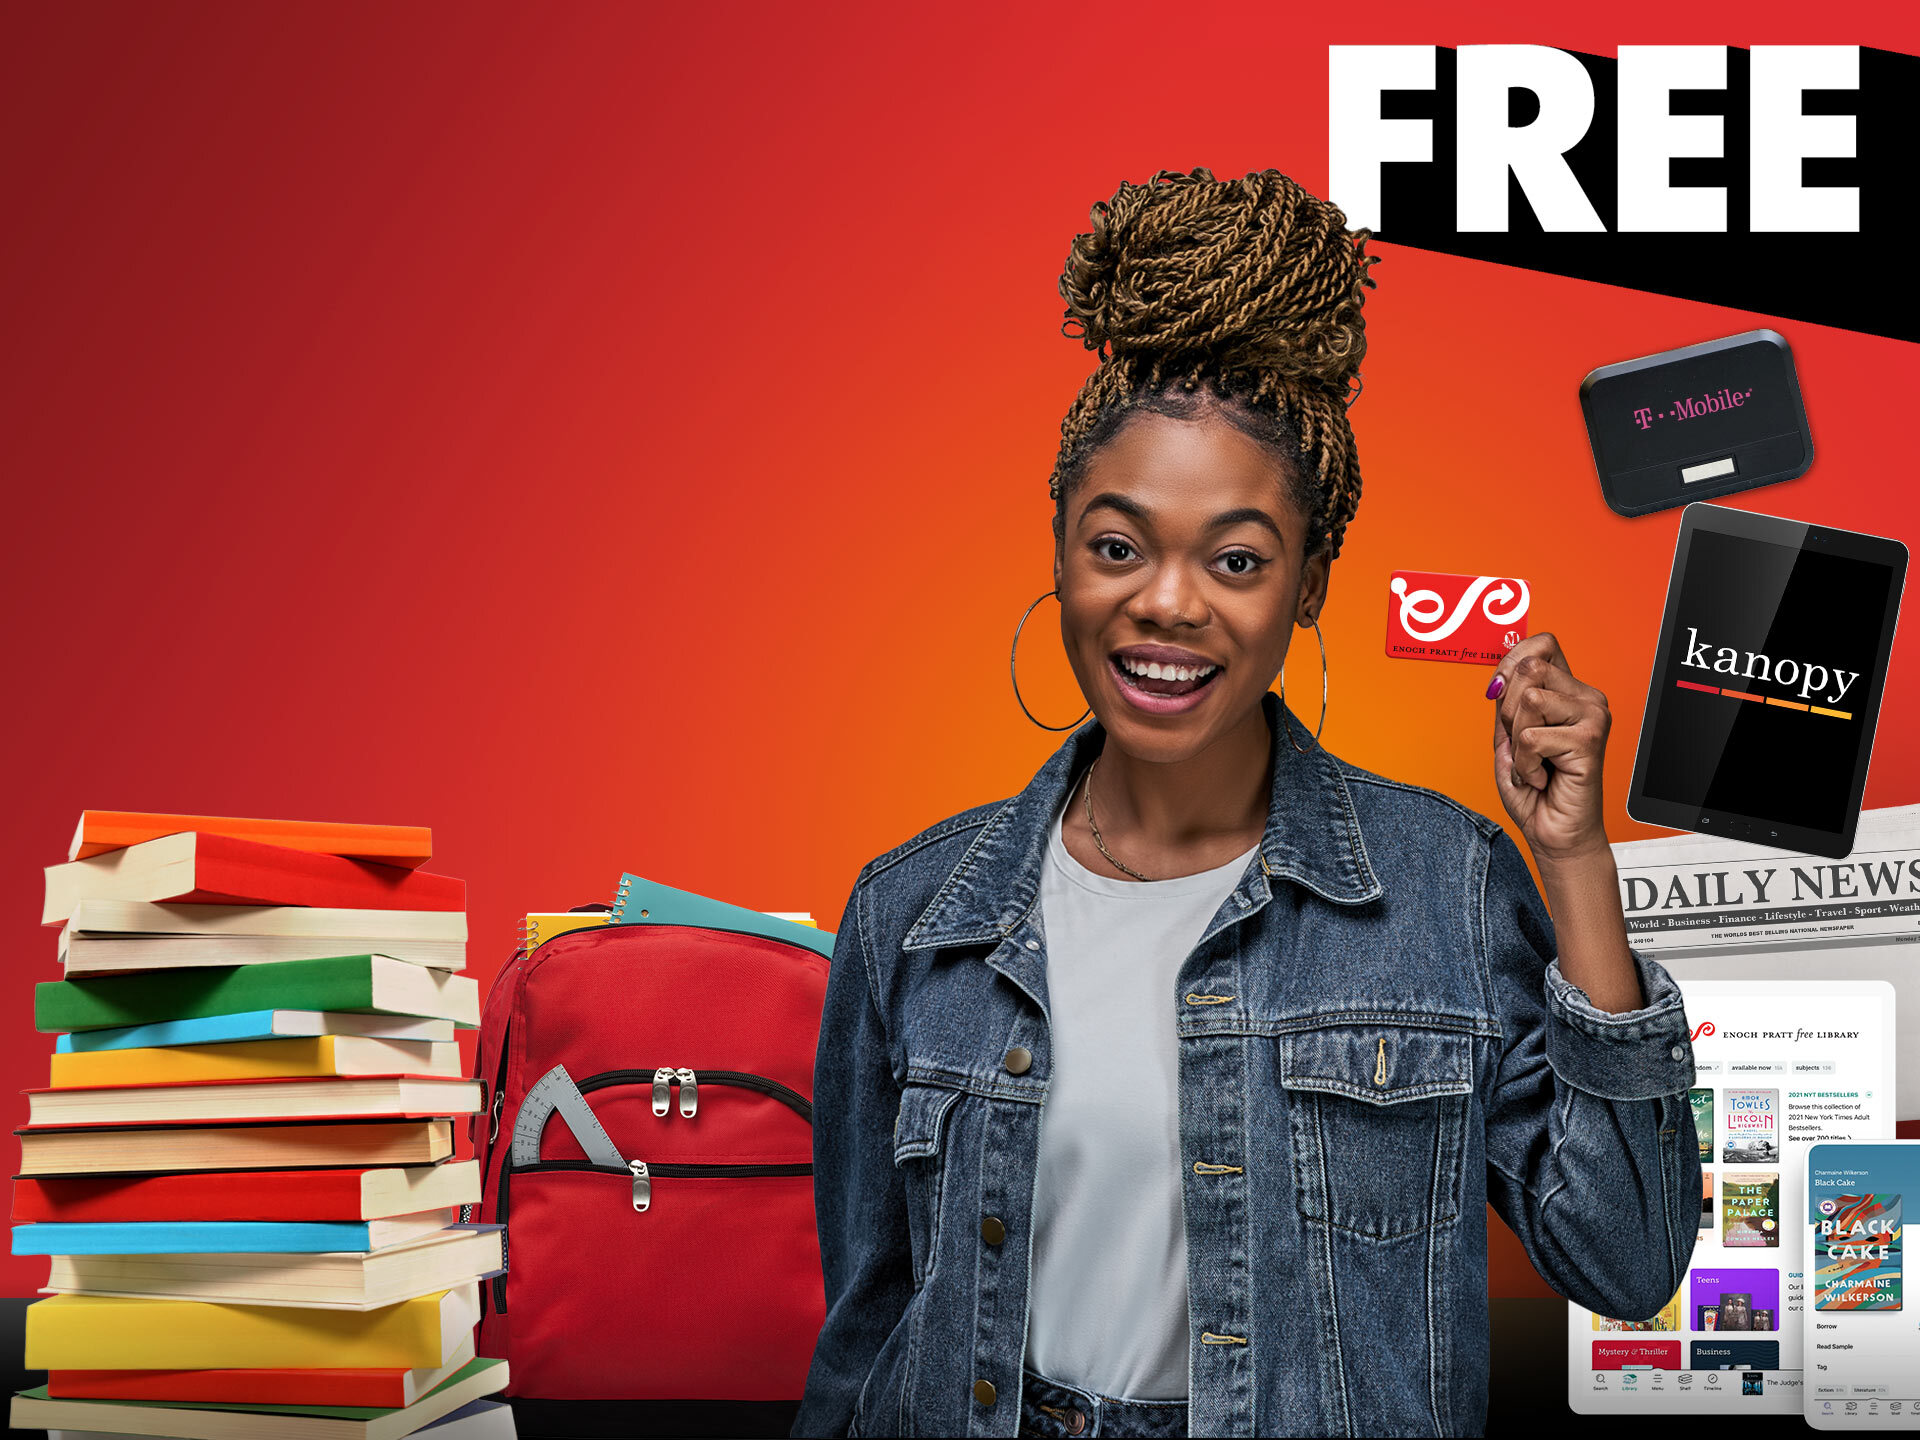 Black Friday 2022 - woman holding a Pratt library card and FREE items like books, streaming movies, a hotspot, and a newspaper